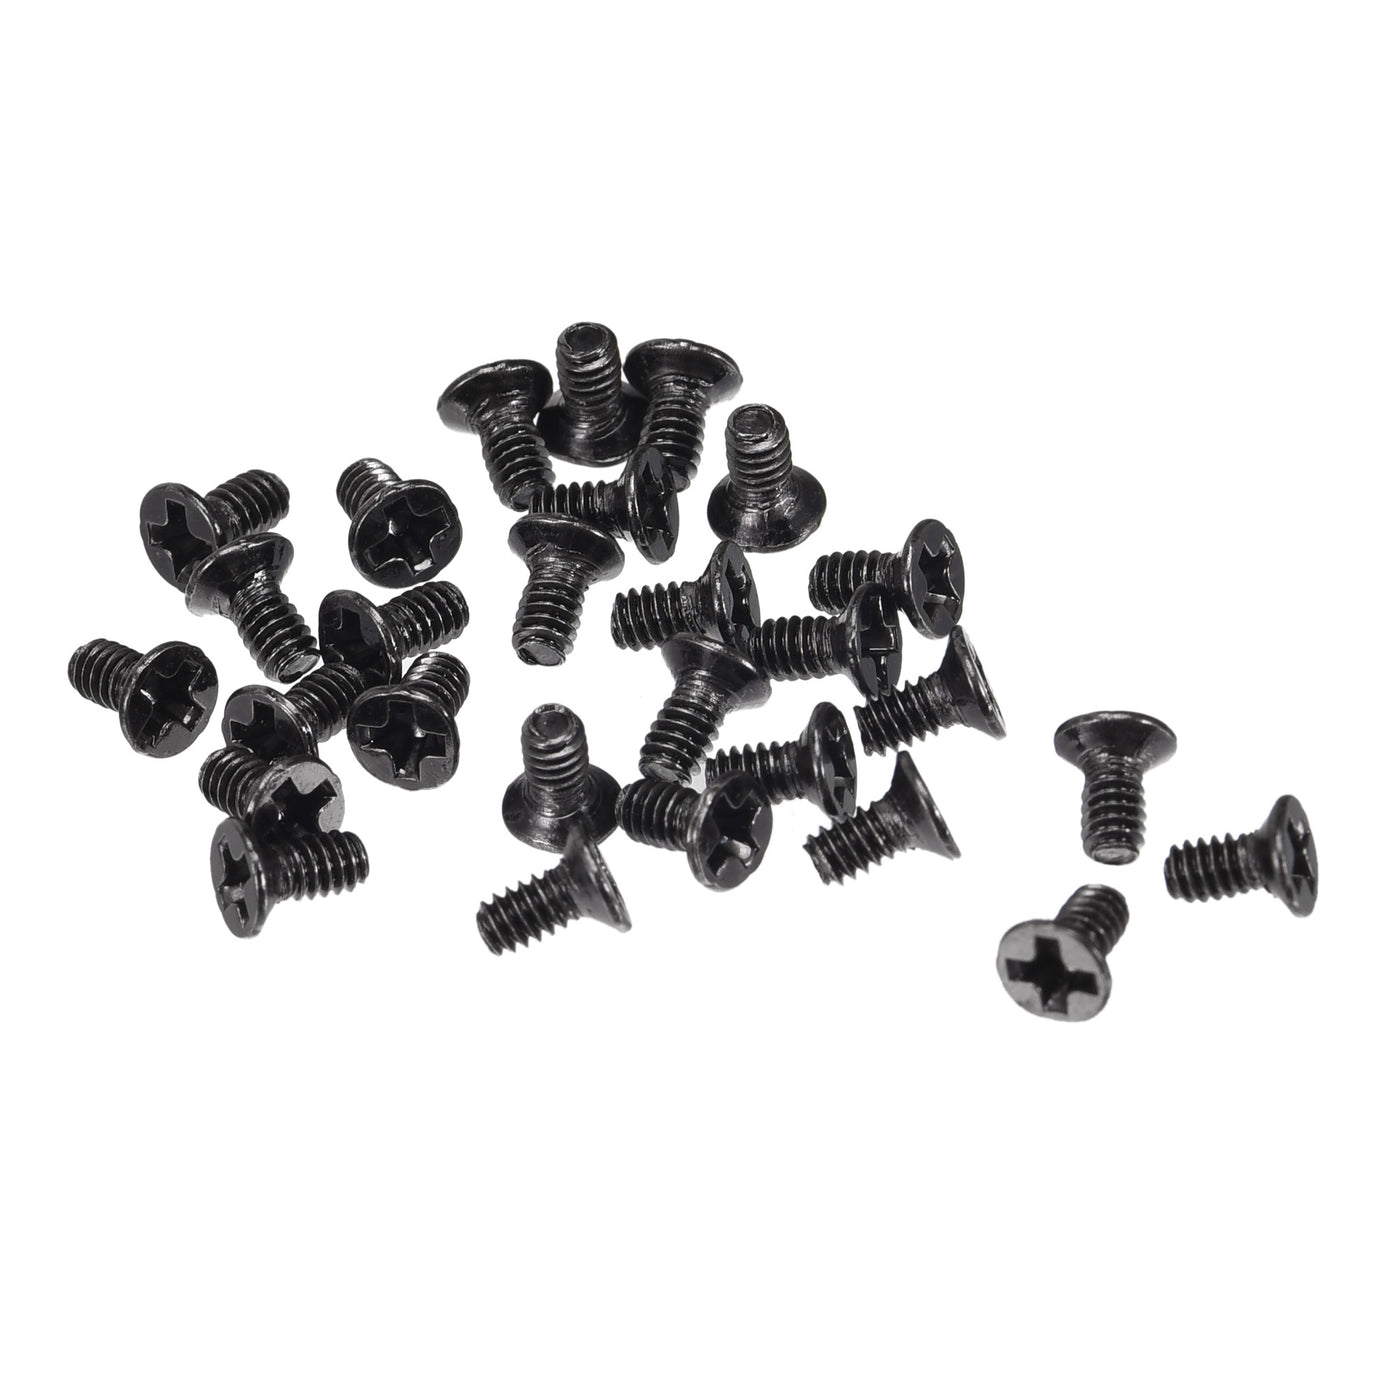 uxcell Uxcell M2 x 4mm Phillips Flat Head Screws Carbon Steel Machine Screws Black for Home Office Computer Case Appliance Equipment 350pcs